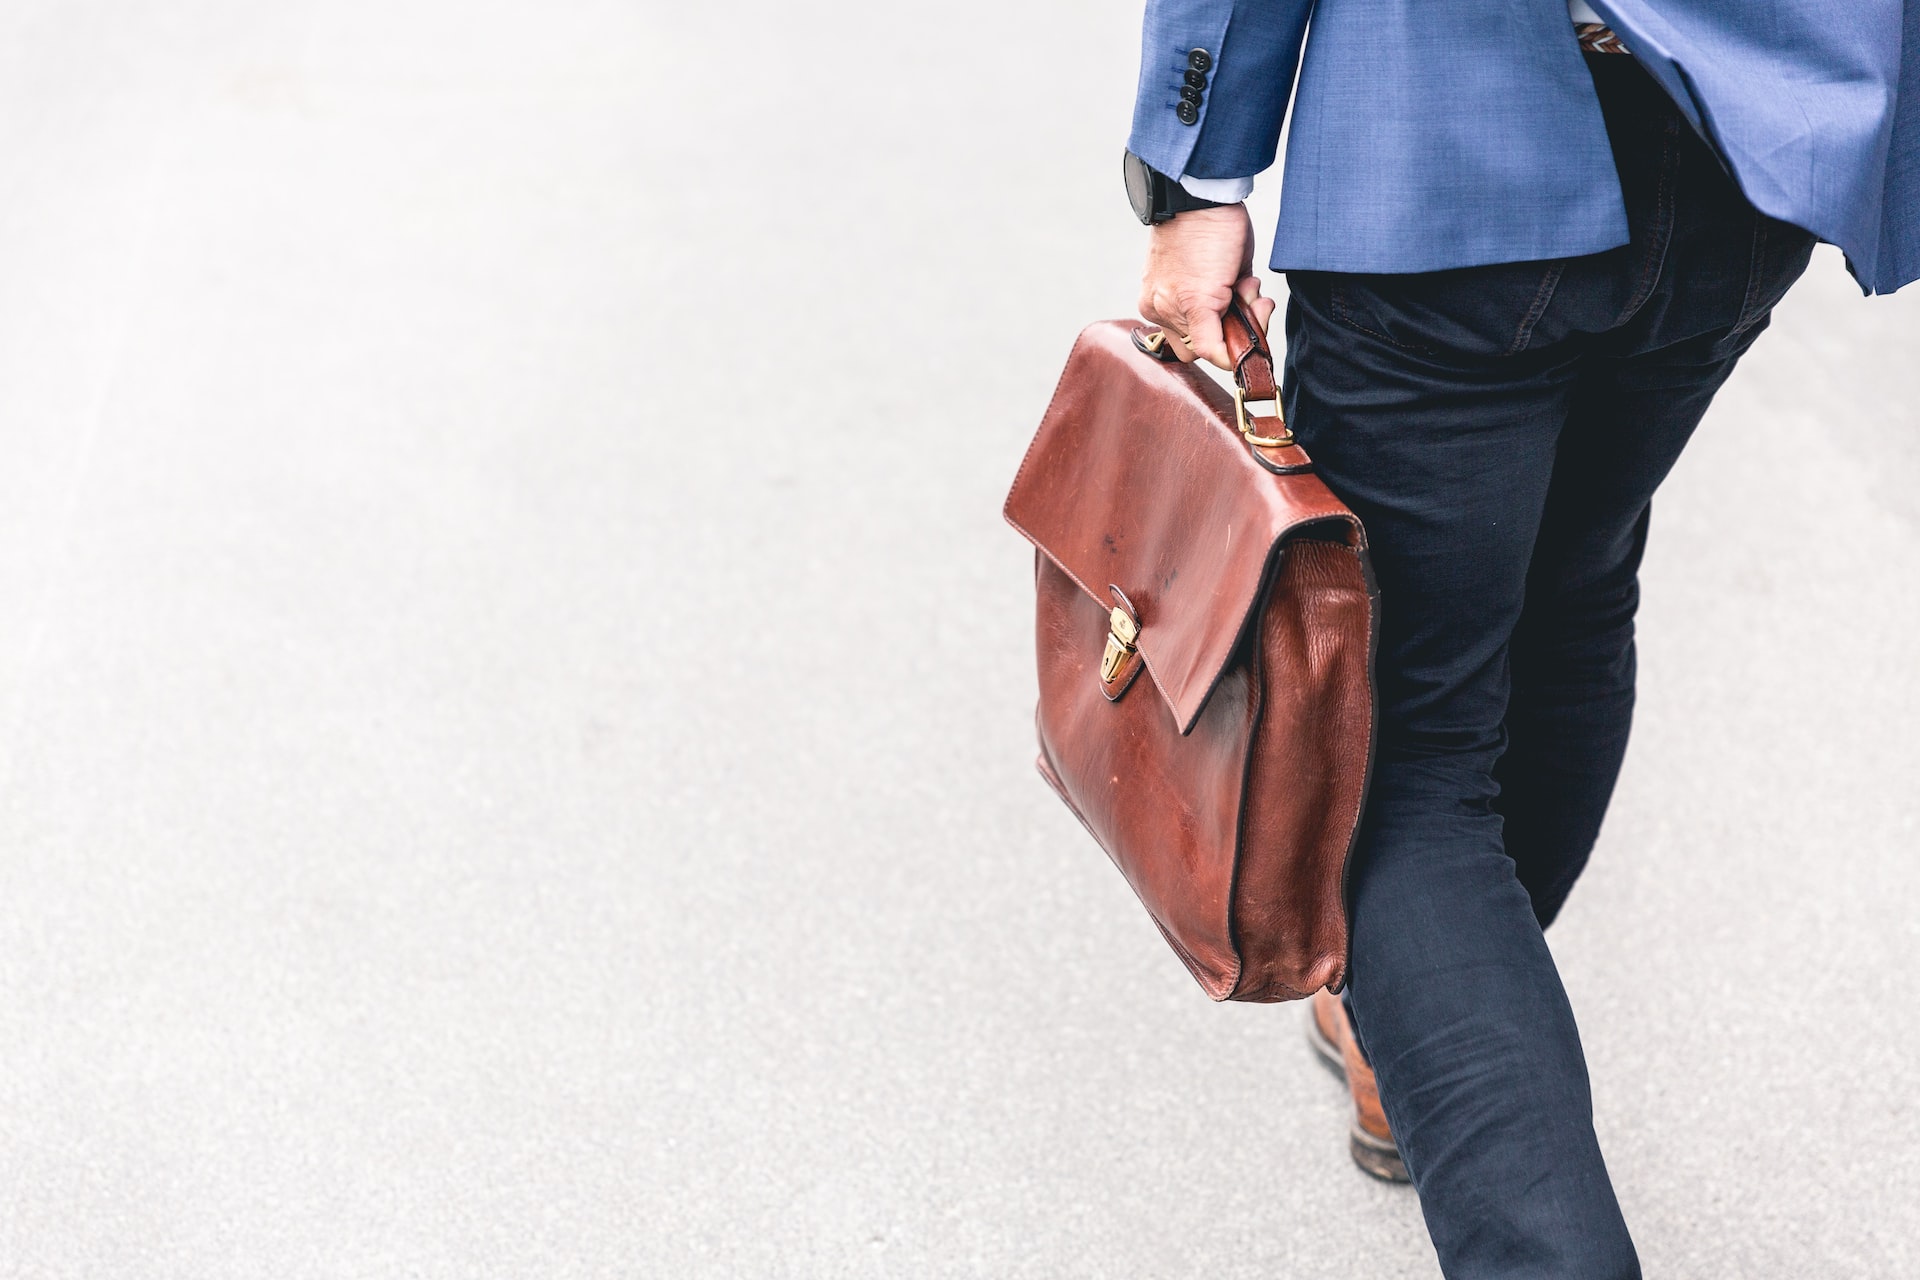 A business owner in a smart suit, holding a satchel bag, walking to a meeting with an ideal customer to propose offers and incentives which will help him make a sale